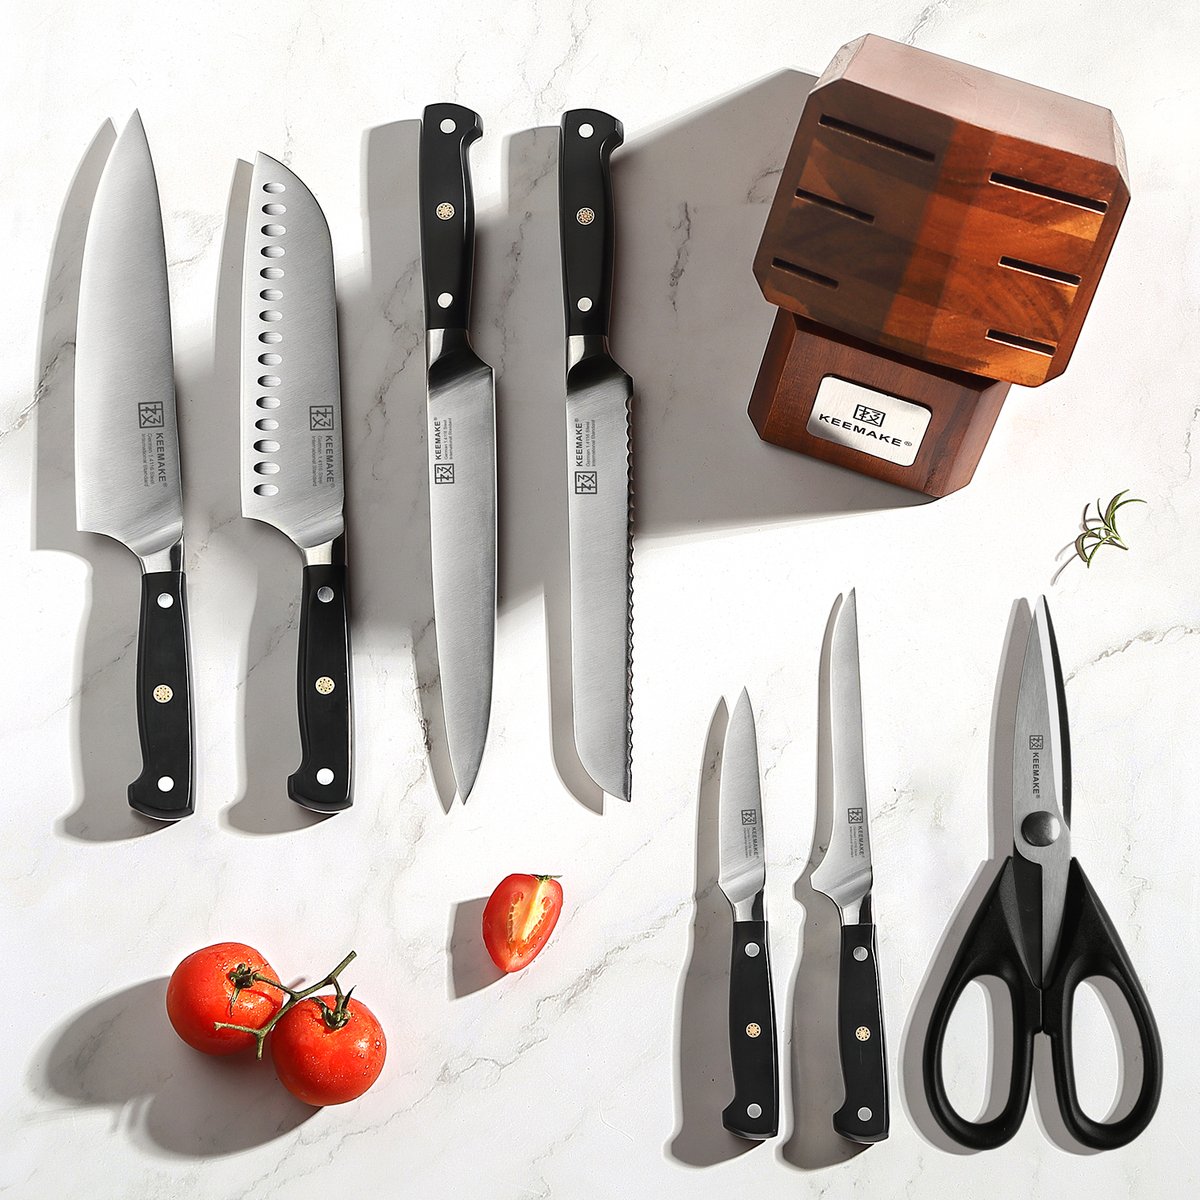 Introducing the KEEMAKE 8-Piece Knife Set! With hand-polished edges and ergonomic handles, these knives ensure exceptional cutting performance and comfort. Elevate your culinary skills today! 🌟🔪 #KEEMAKE #ChefKnives #KitchenUpgrade